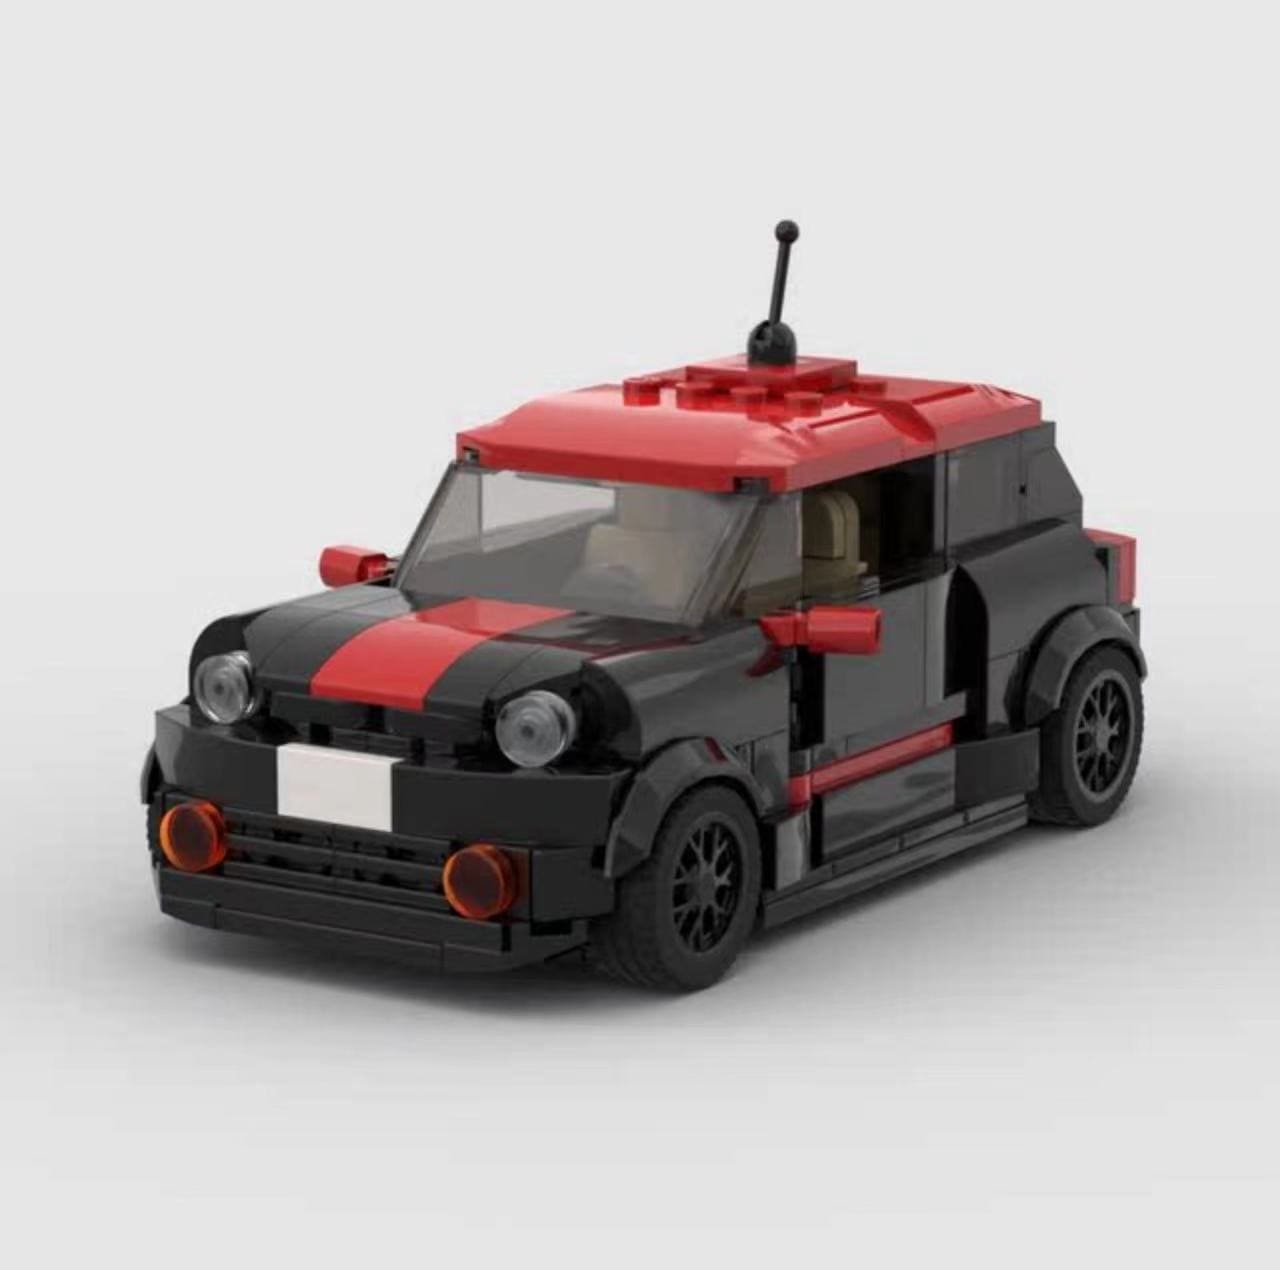 Brick Mini Cooper from Brickify - For €27.99! Buy now on Brickify